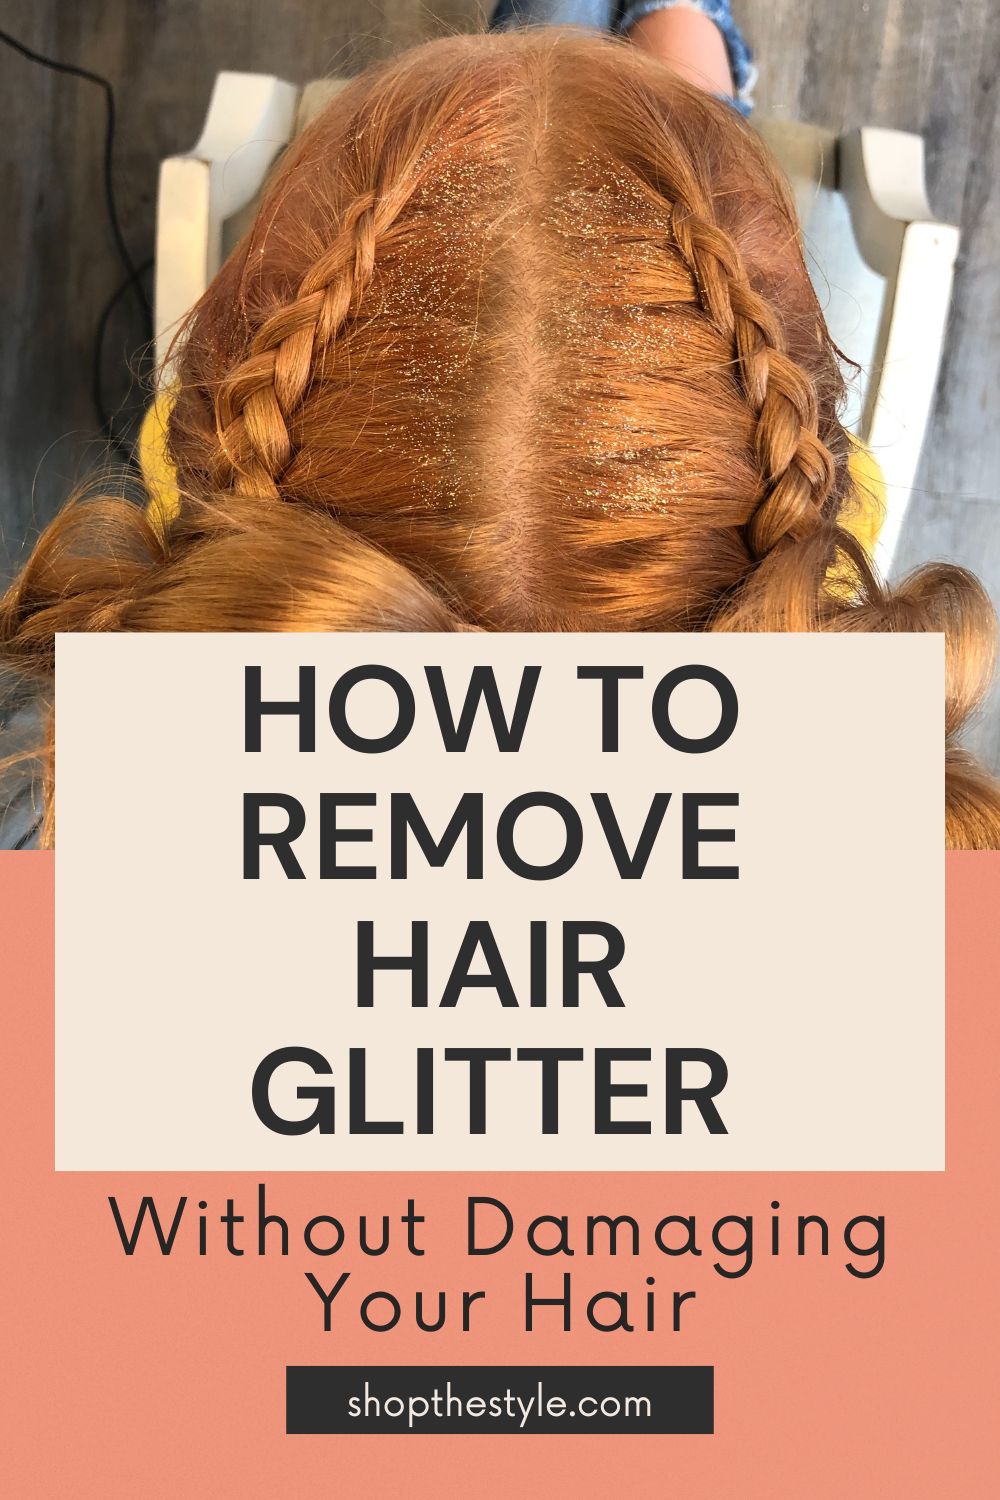 How to Remove Hair Glitter Without Damaging Your Hair